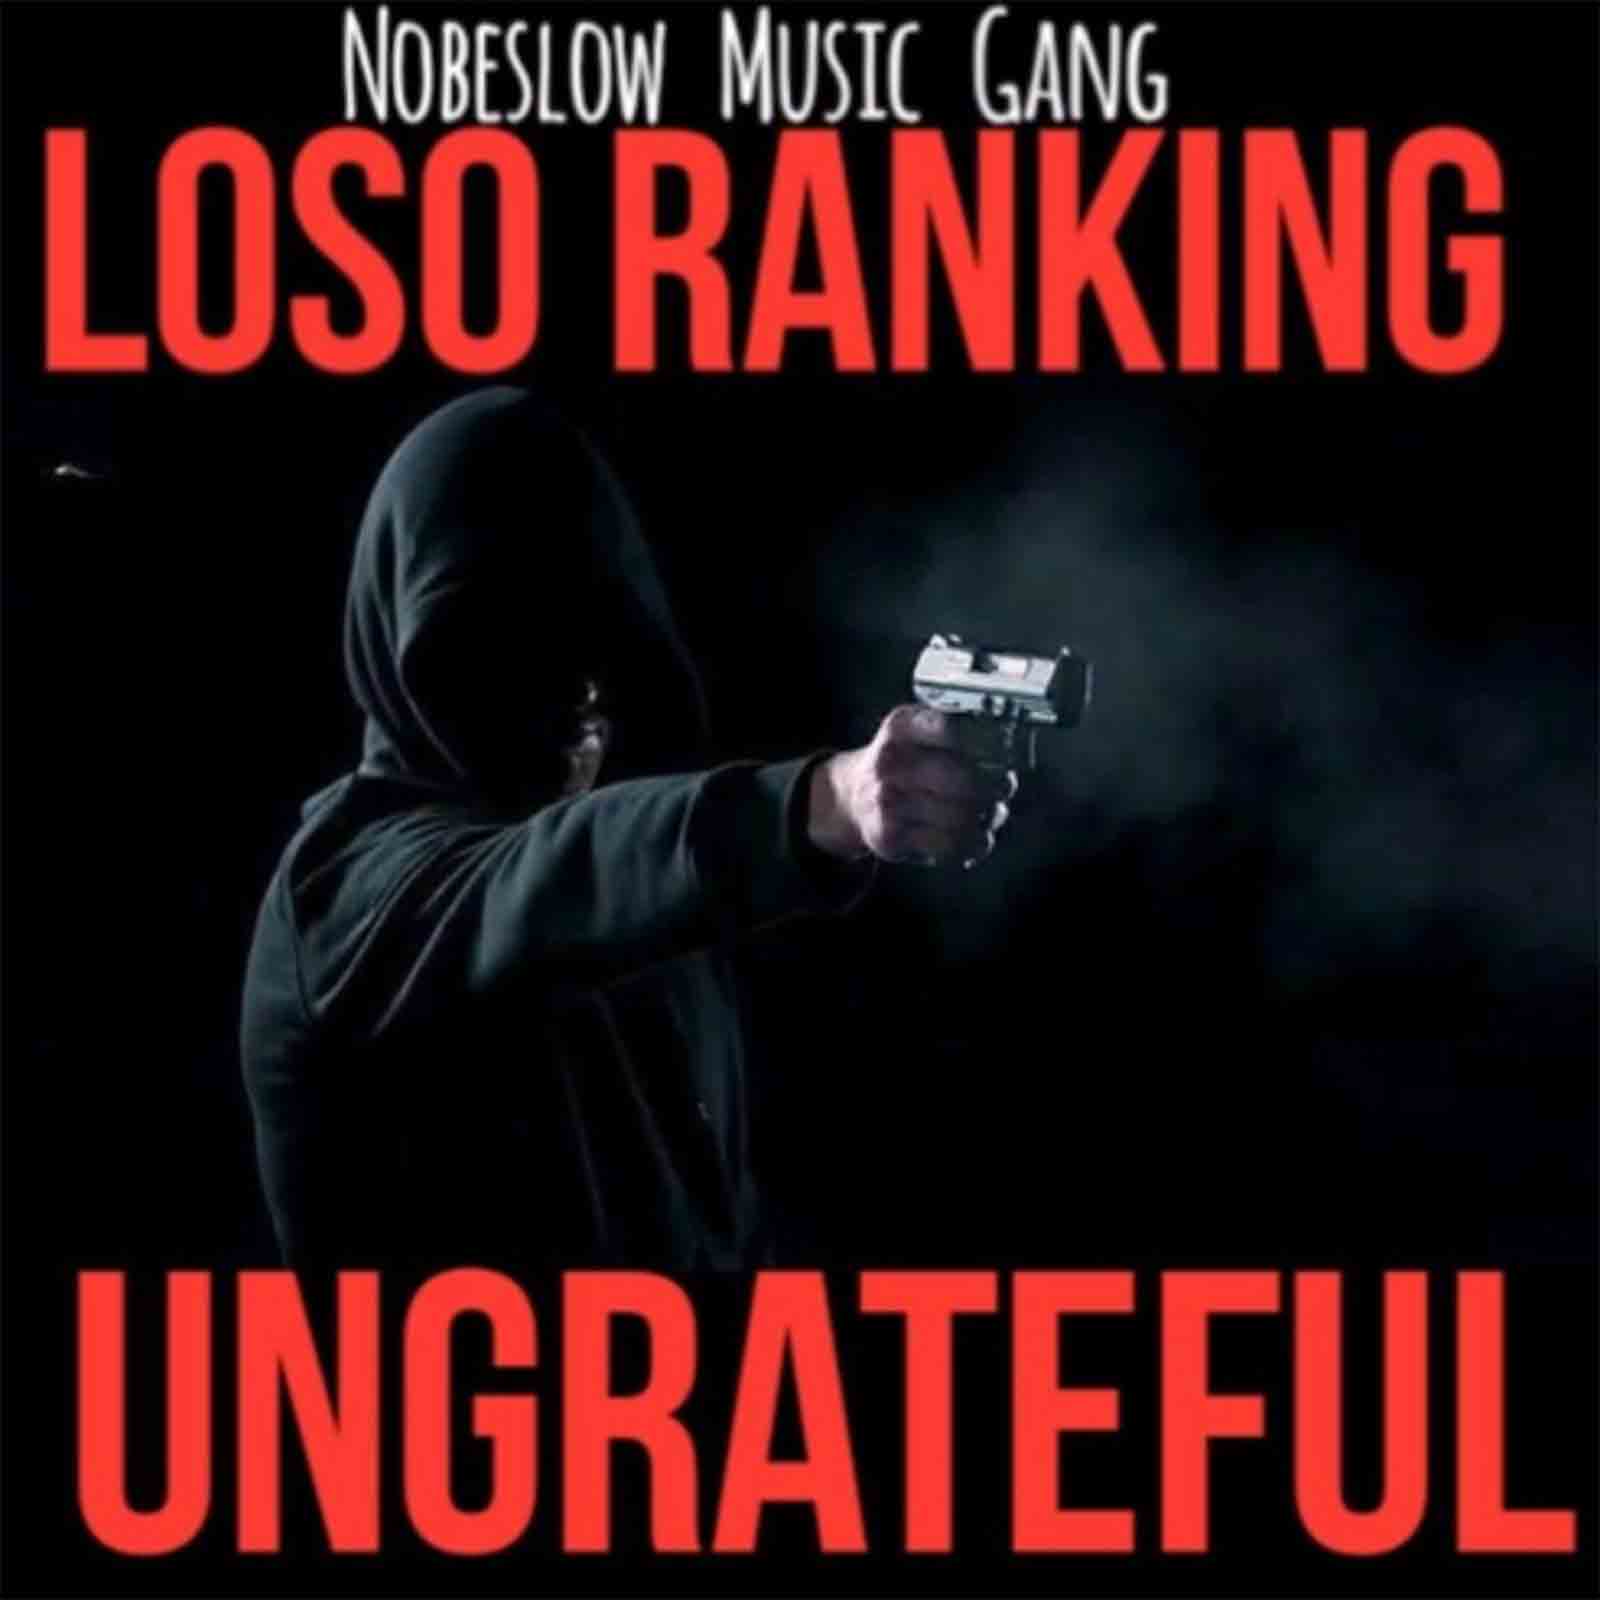 Ungrateful by Loso Ranking